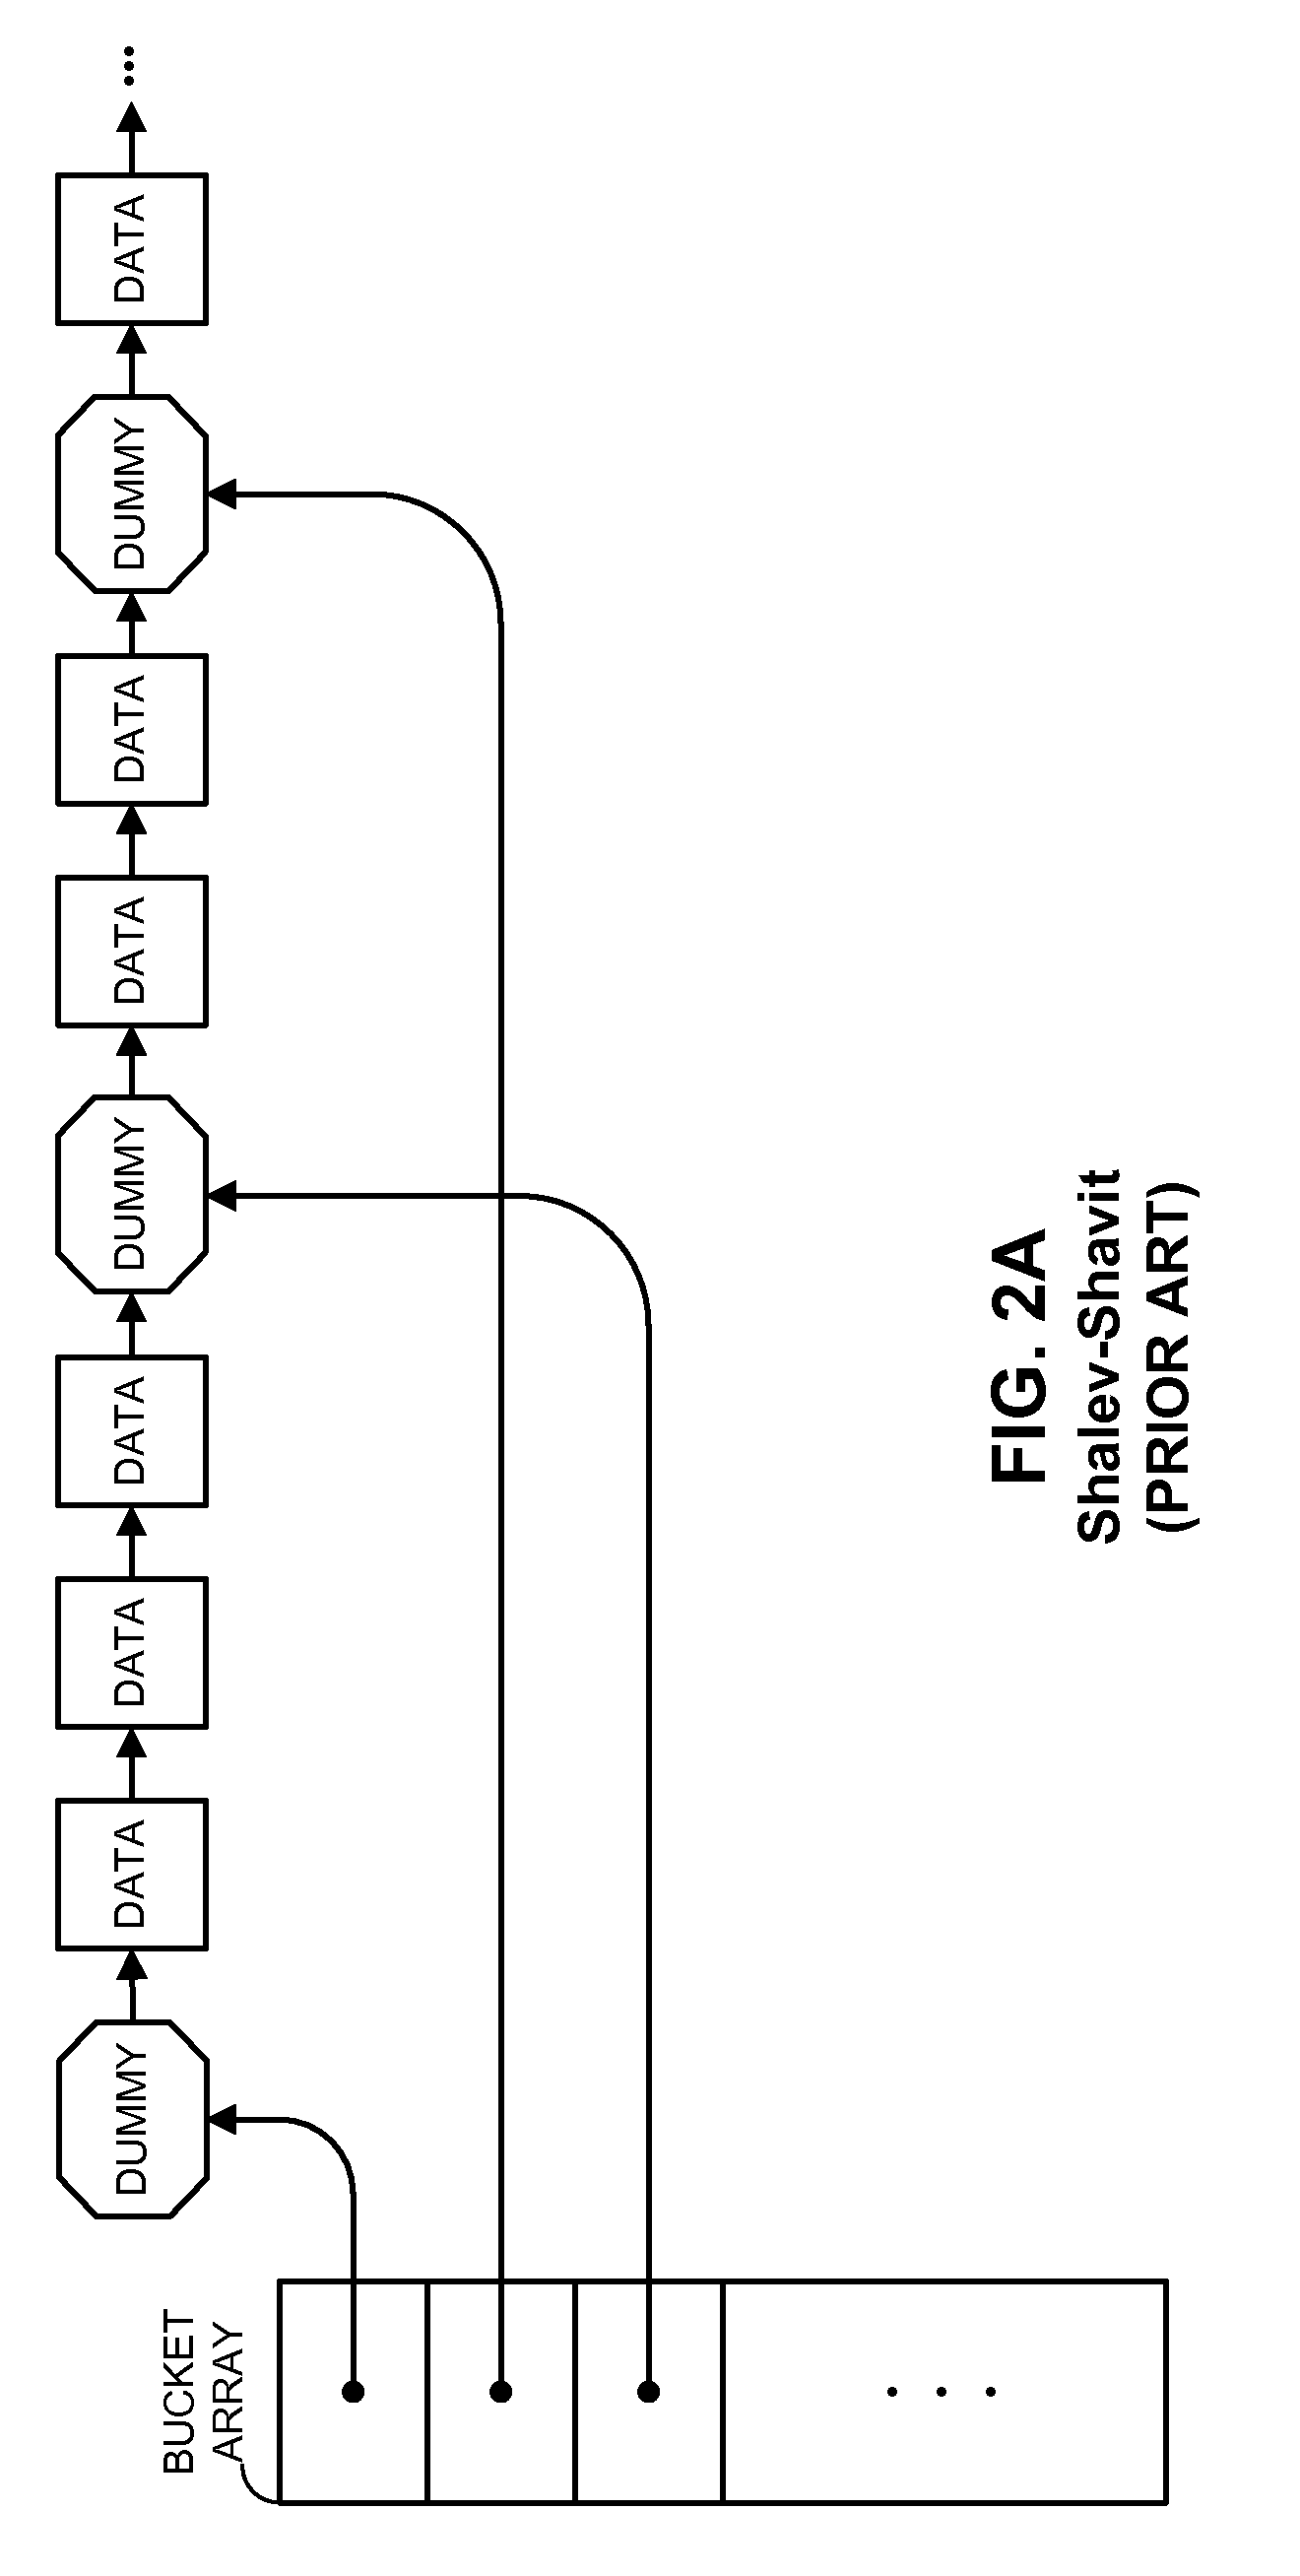 Method and apparatus for indexing a hash table which is organized as a linked list